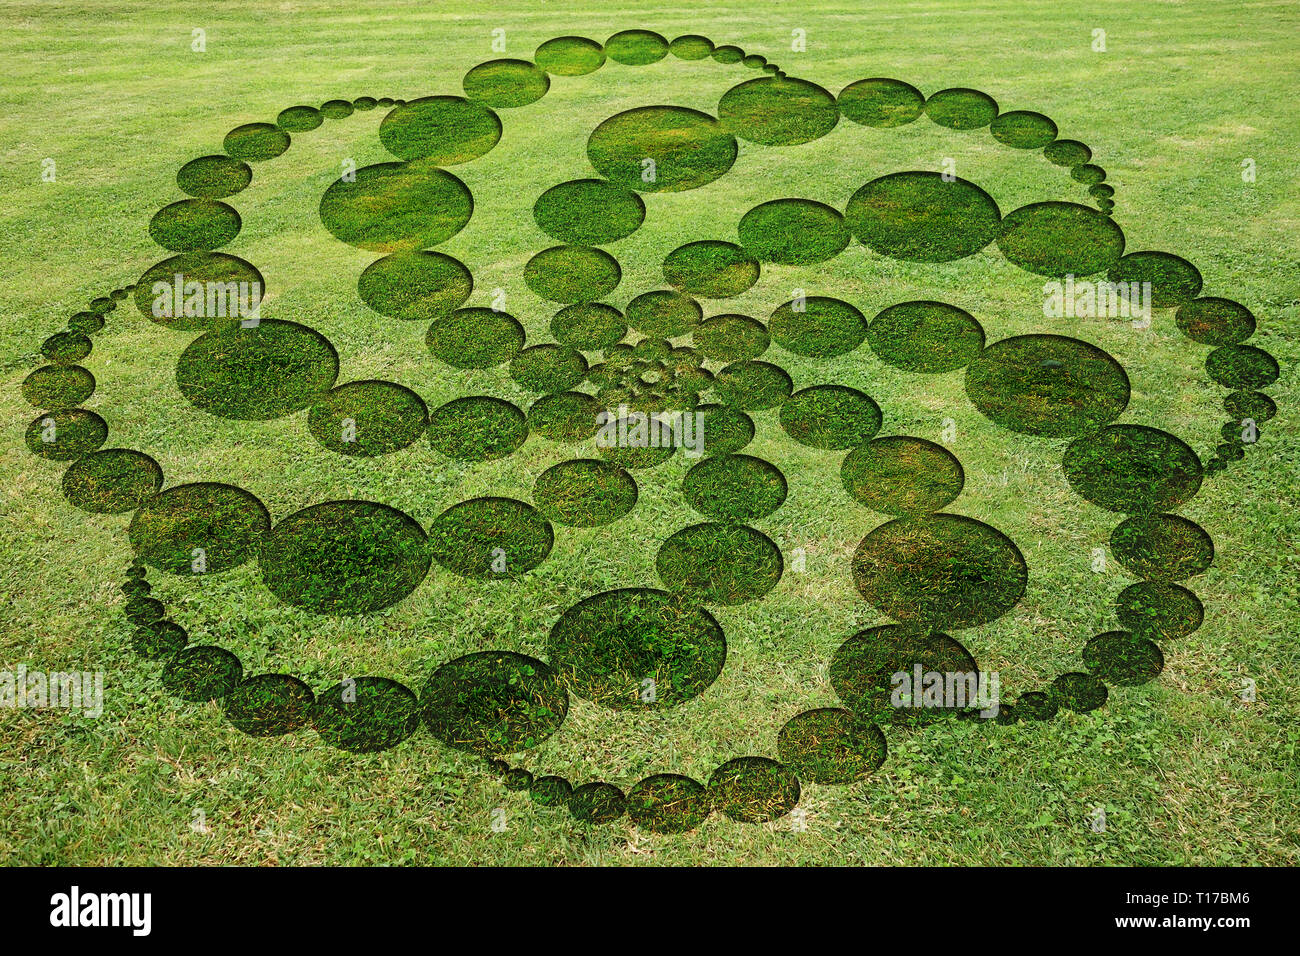 Concentric circles spirals encrypted symbols fake crop circle in the meadow Stock Photo